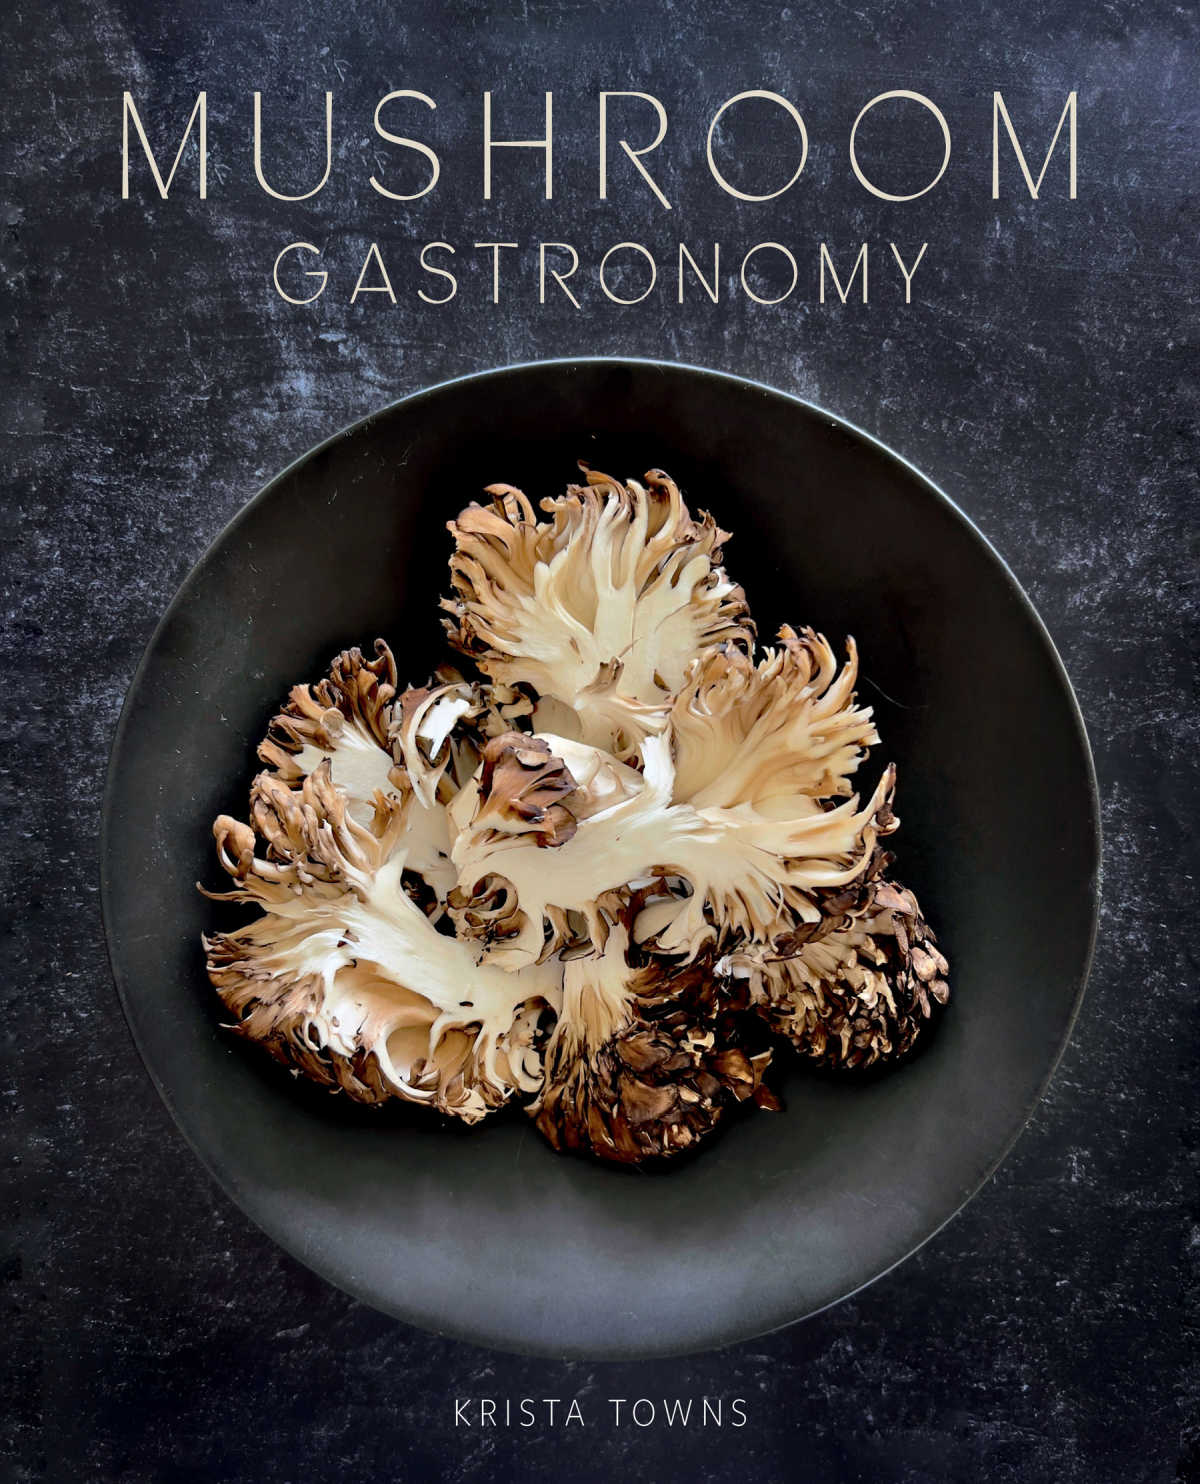 Calling all mushroom lovers (and newbies)! "Mushroom Gastronomy: The Art of Cooking with Mushrooms" is a stunning new cookbook that will take you on a delicious journey into the world of edible fungi. With gorgeous photography, expert advice, and over 100 creative recipes, this book is a must-have for any kitchen.